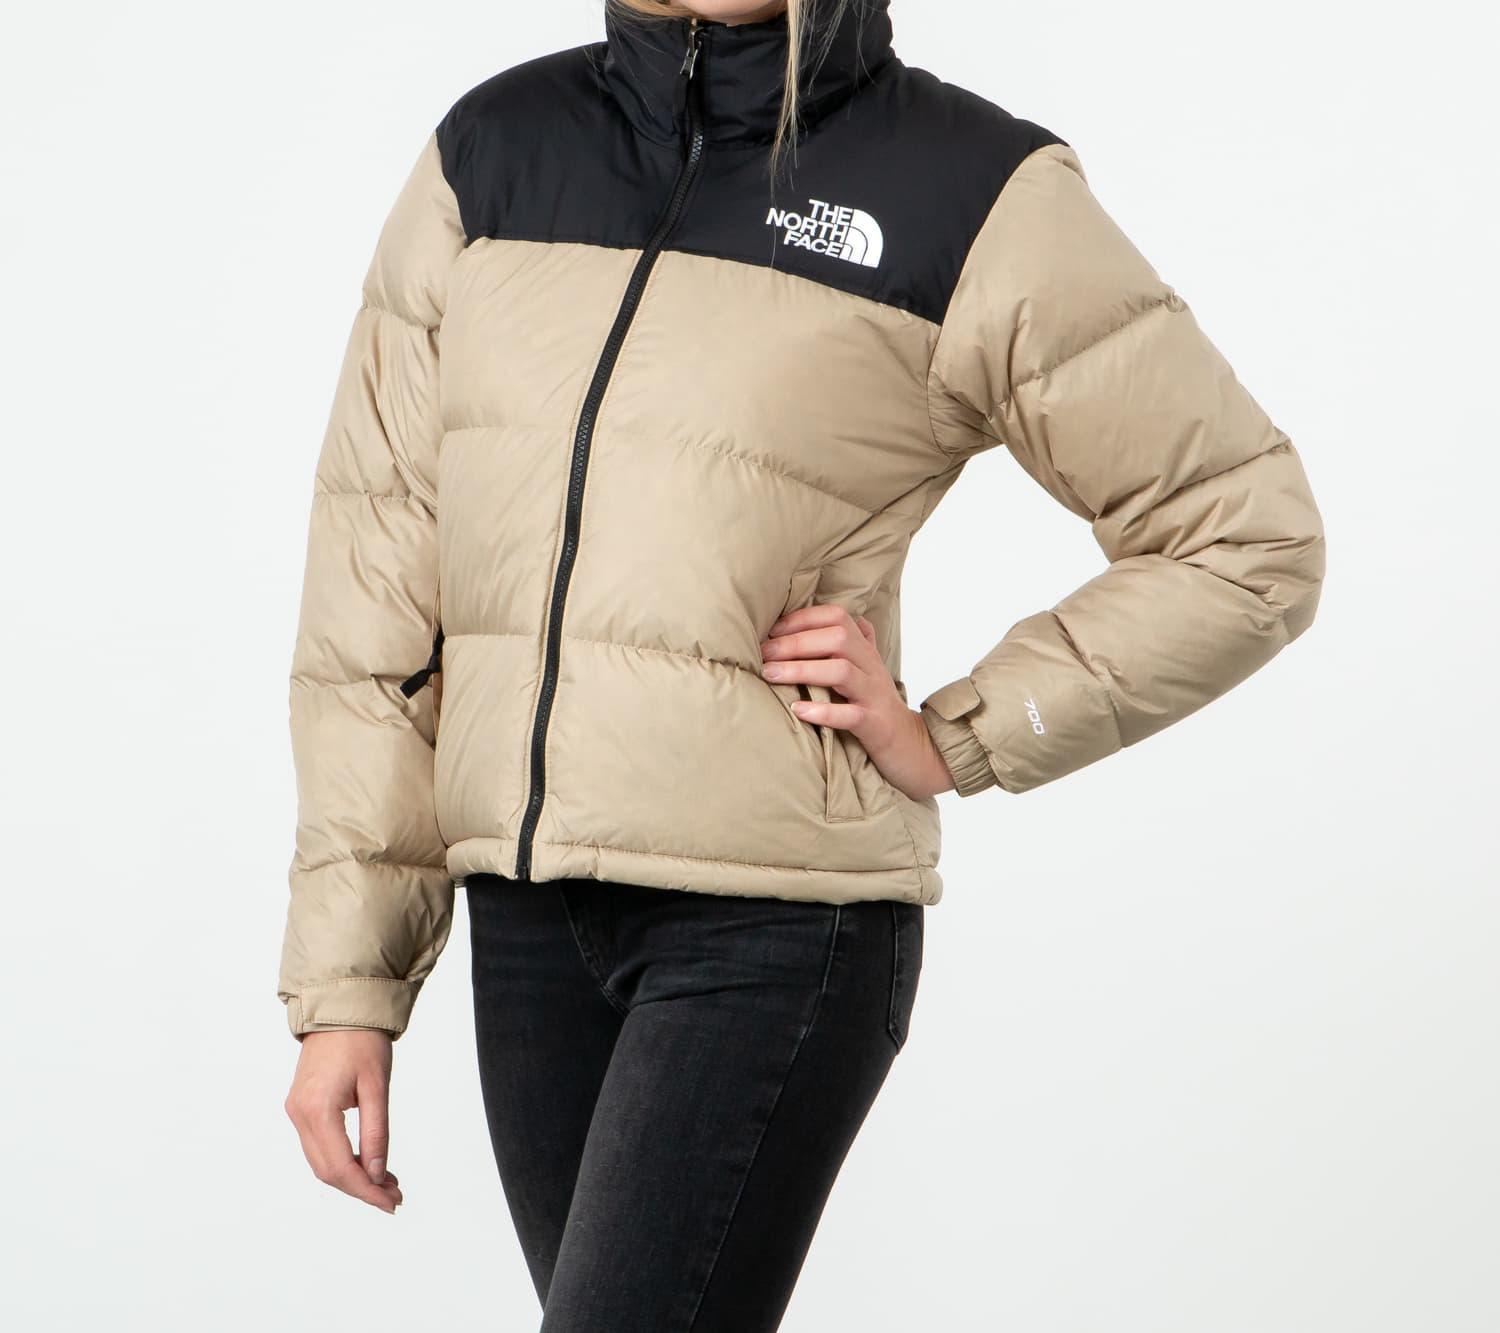 The North Face Jacket Beige Luxembourg, SAVE 35% - horiconphoenix.com